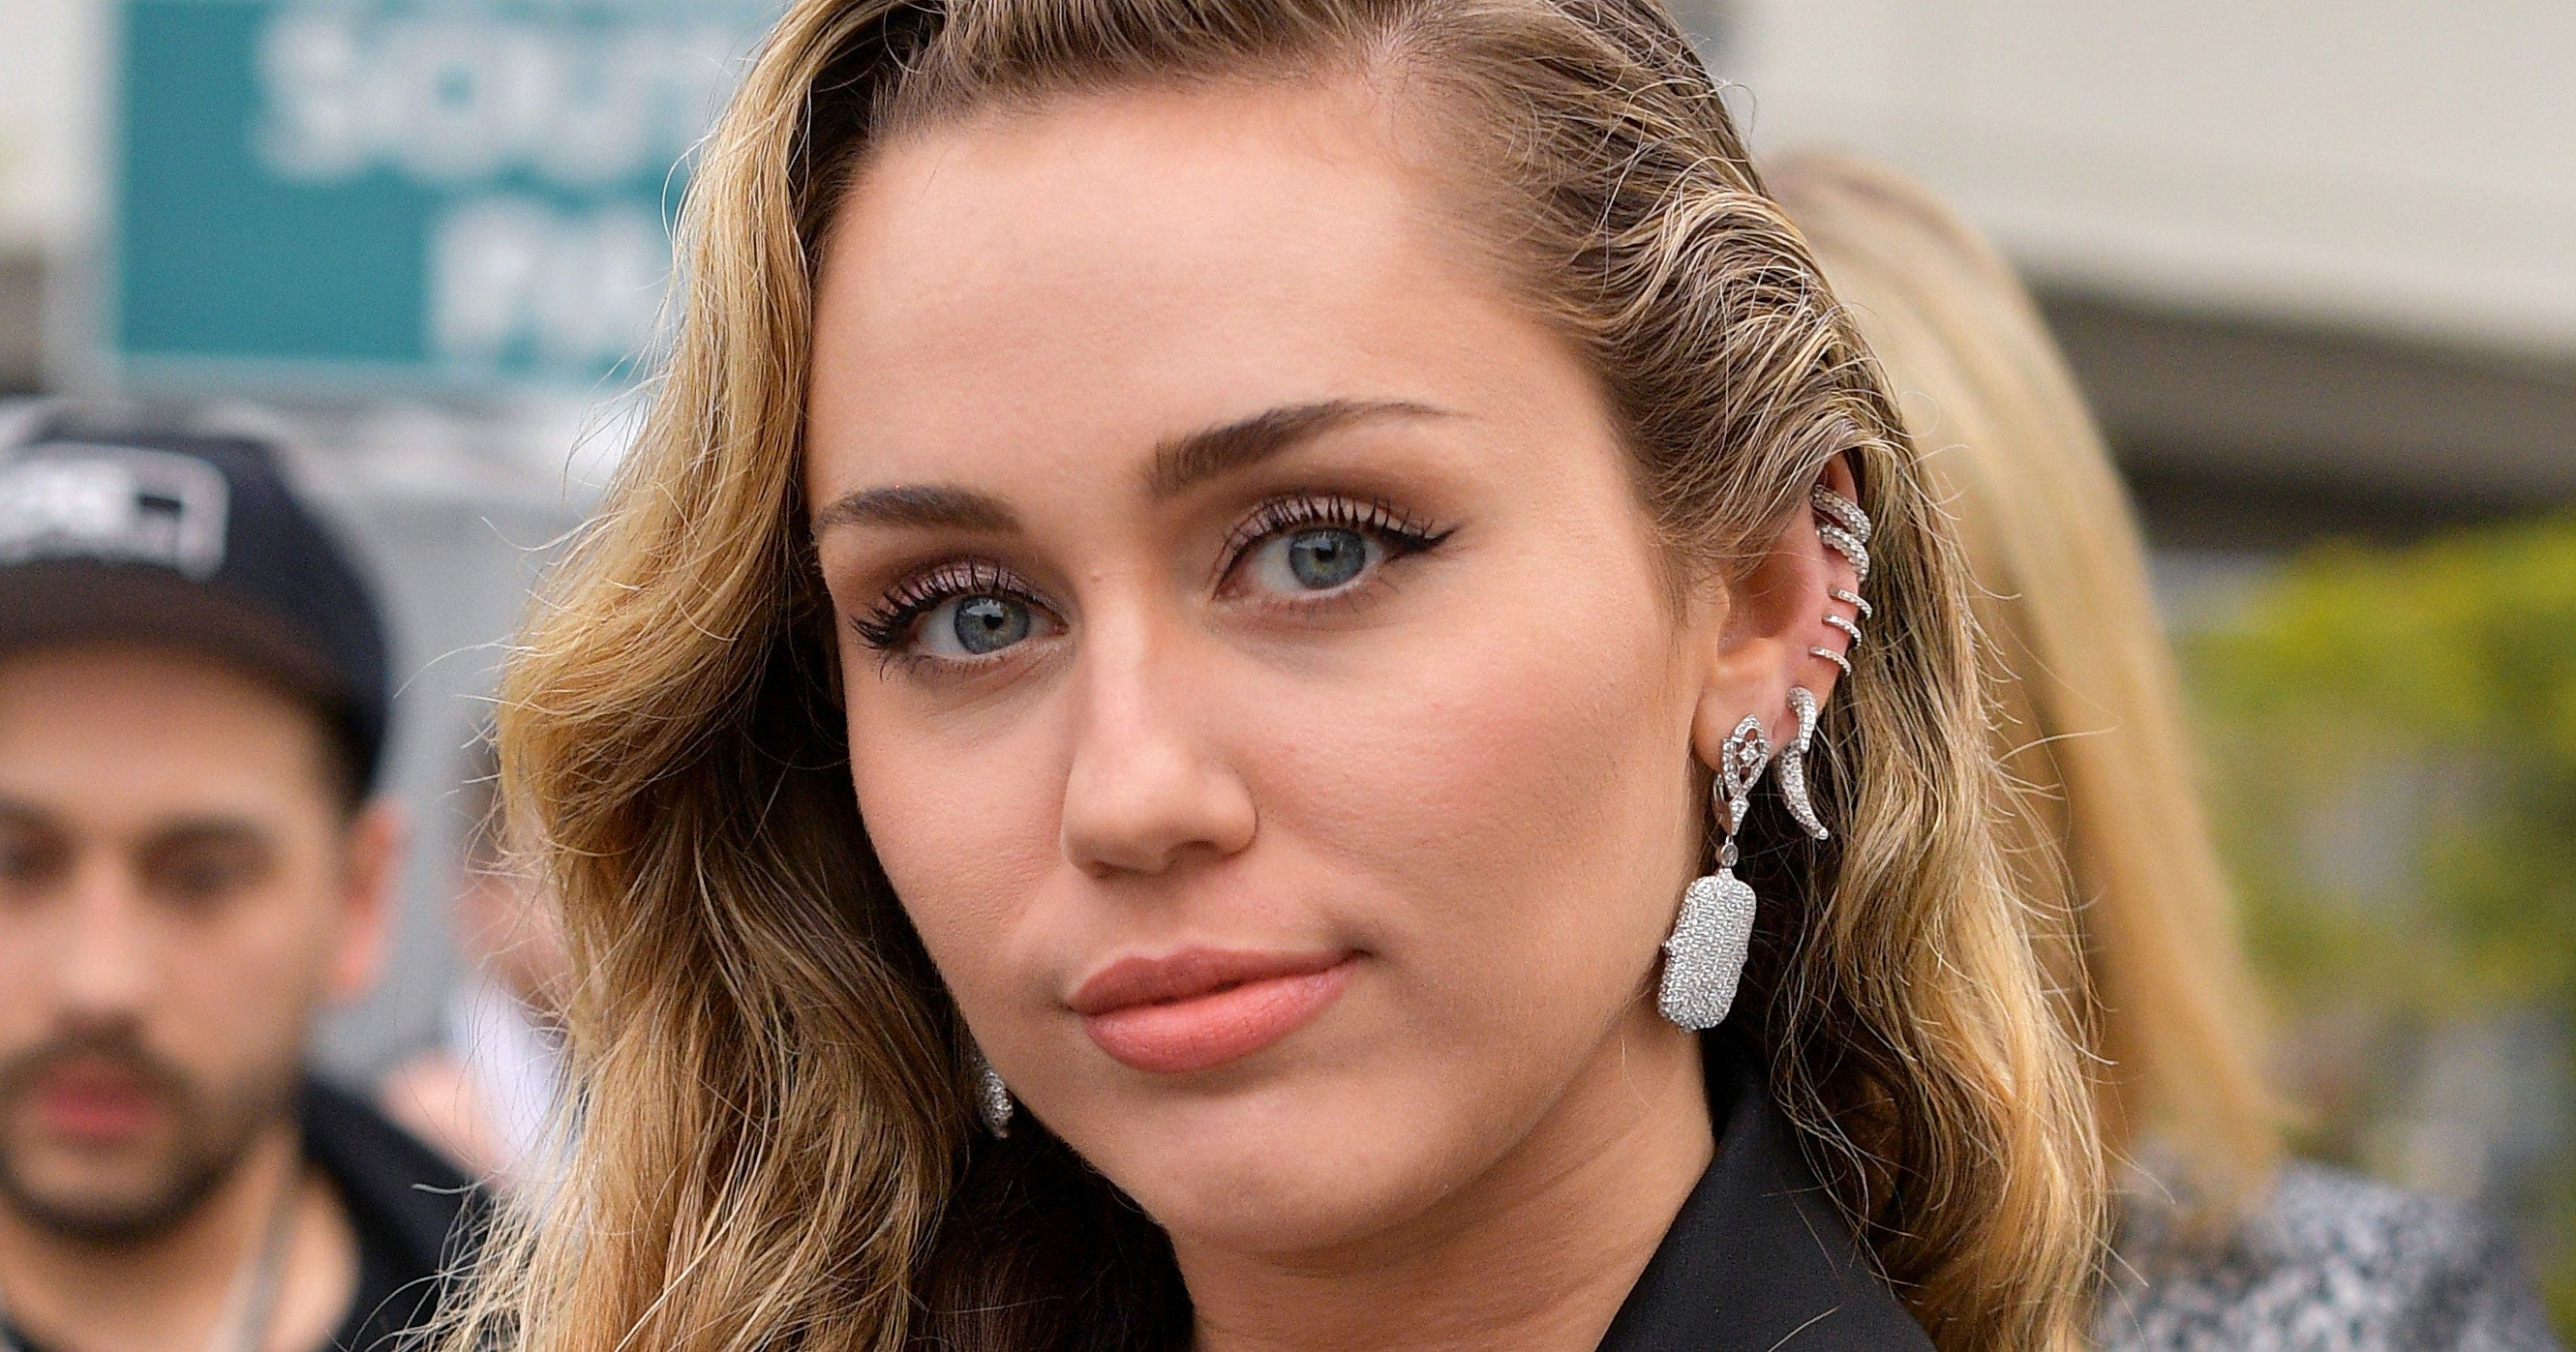 Miley Cyrus Debuts New Mullet Shag Haircut On Instagram